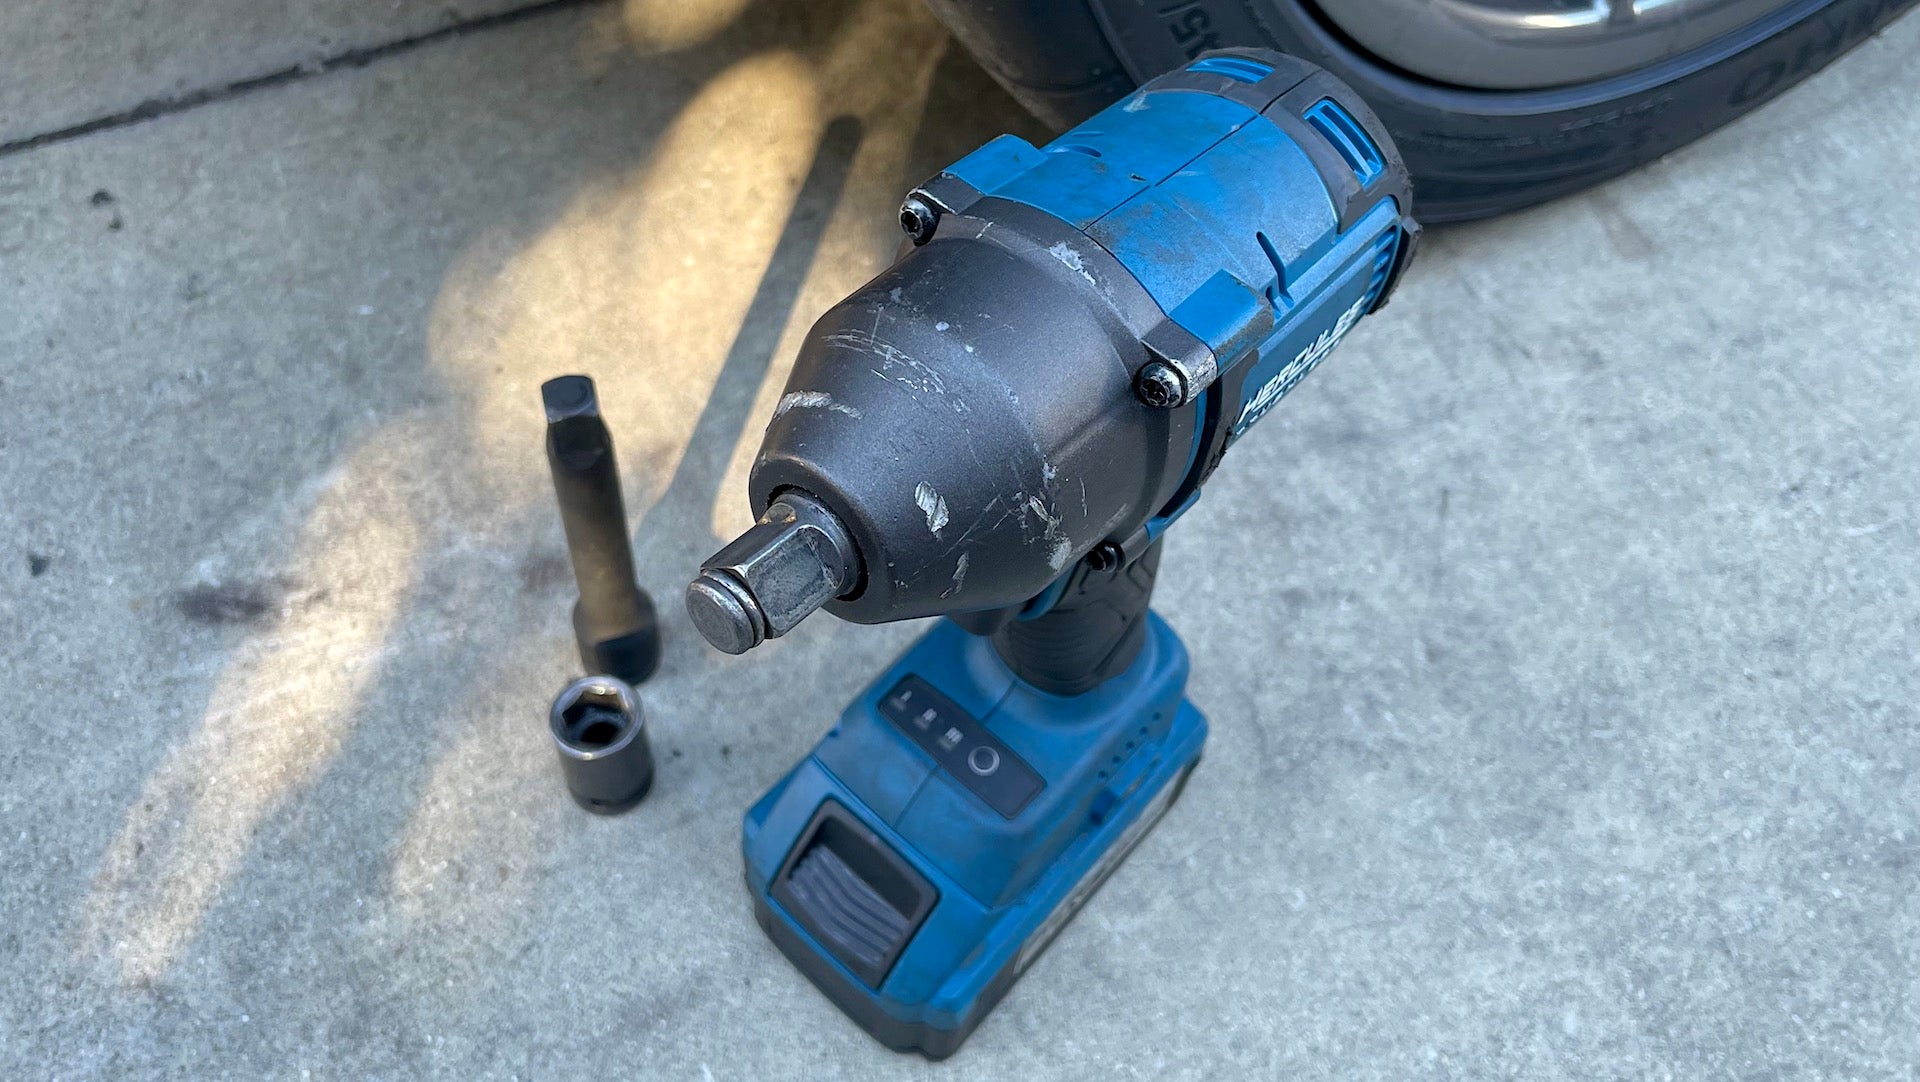 Harbor Freight's Hercules 20V 1/2 in. Compact Impact Wrench Reviewed